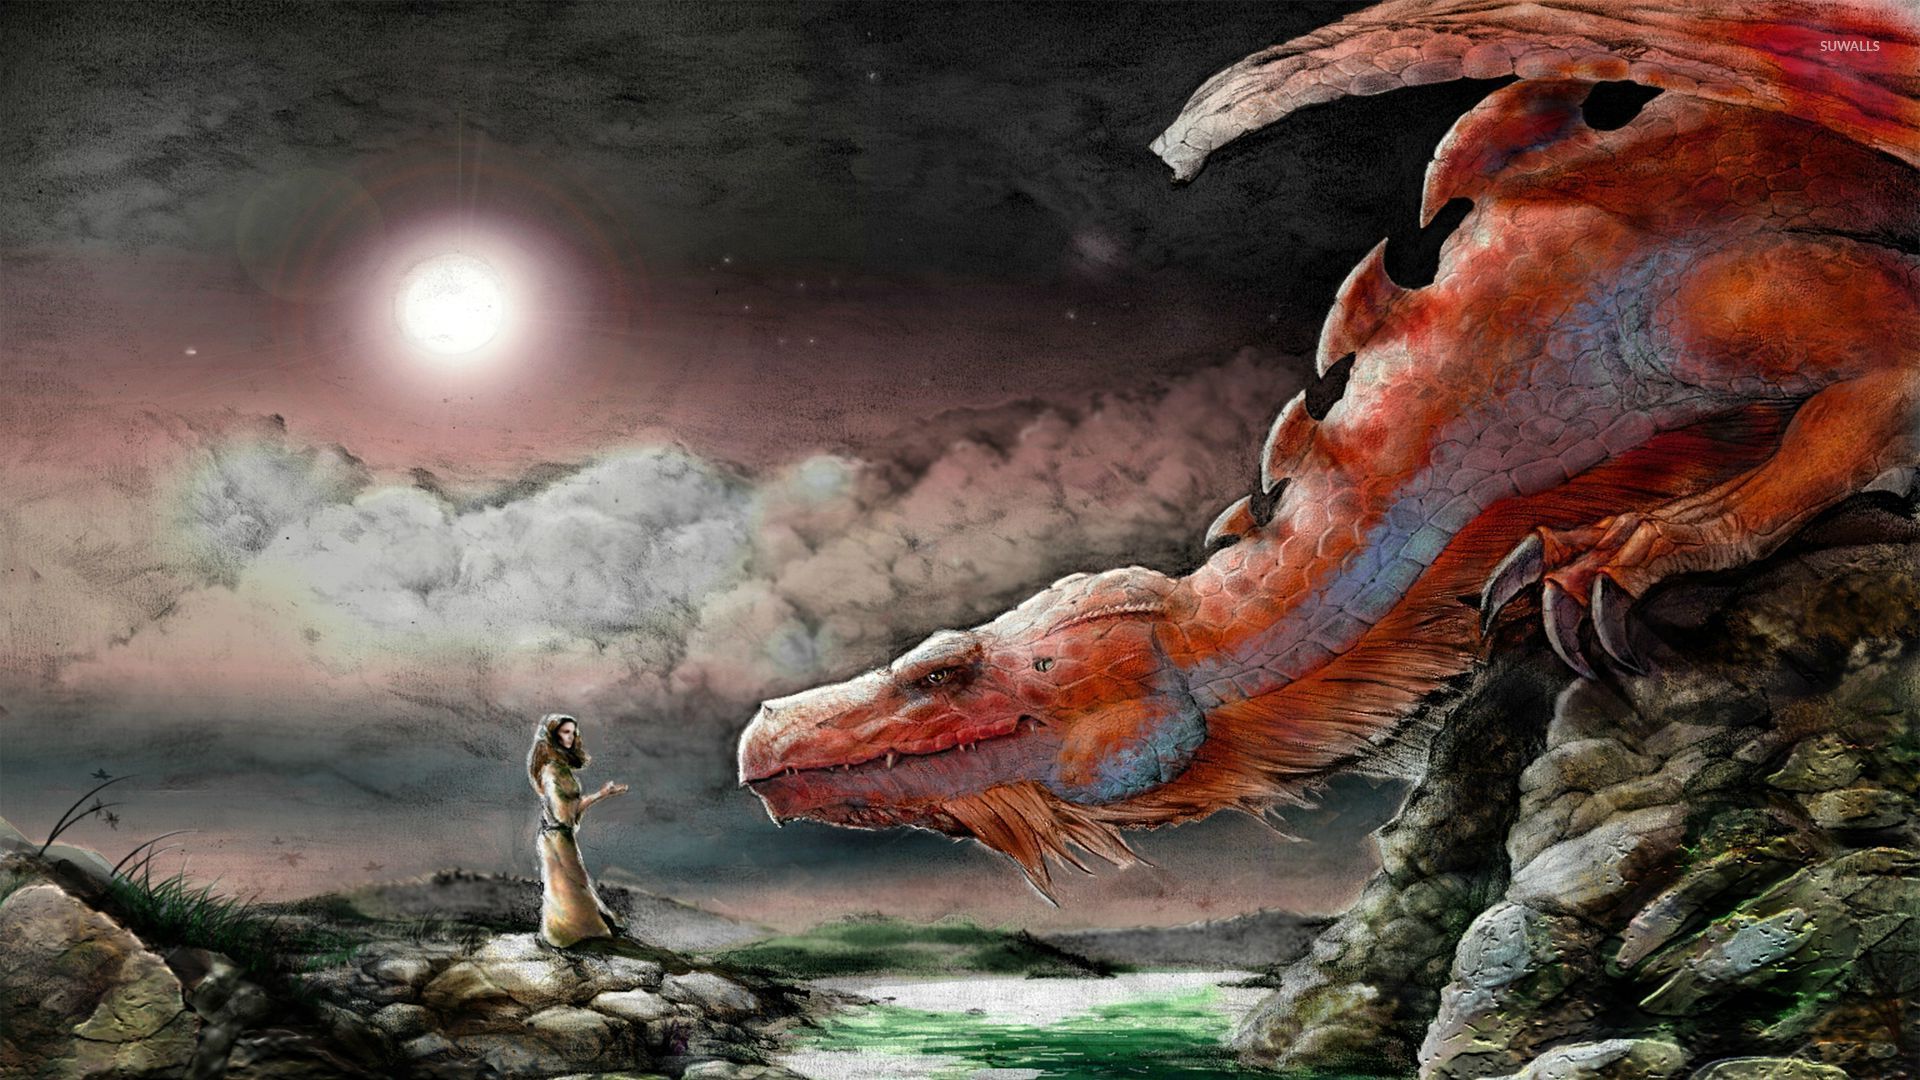 Woman And Red Dragon - HD Wallpaper 